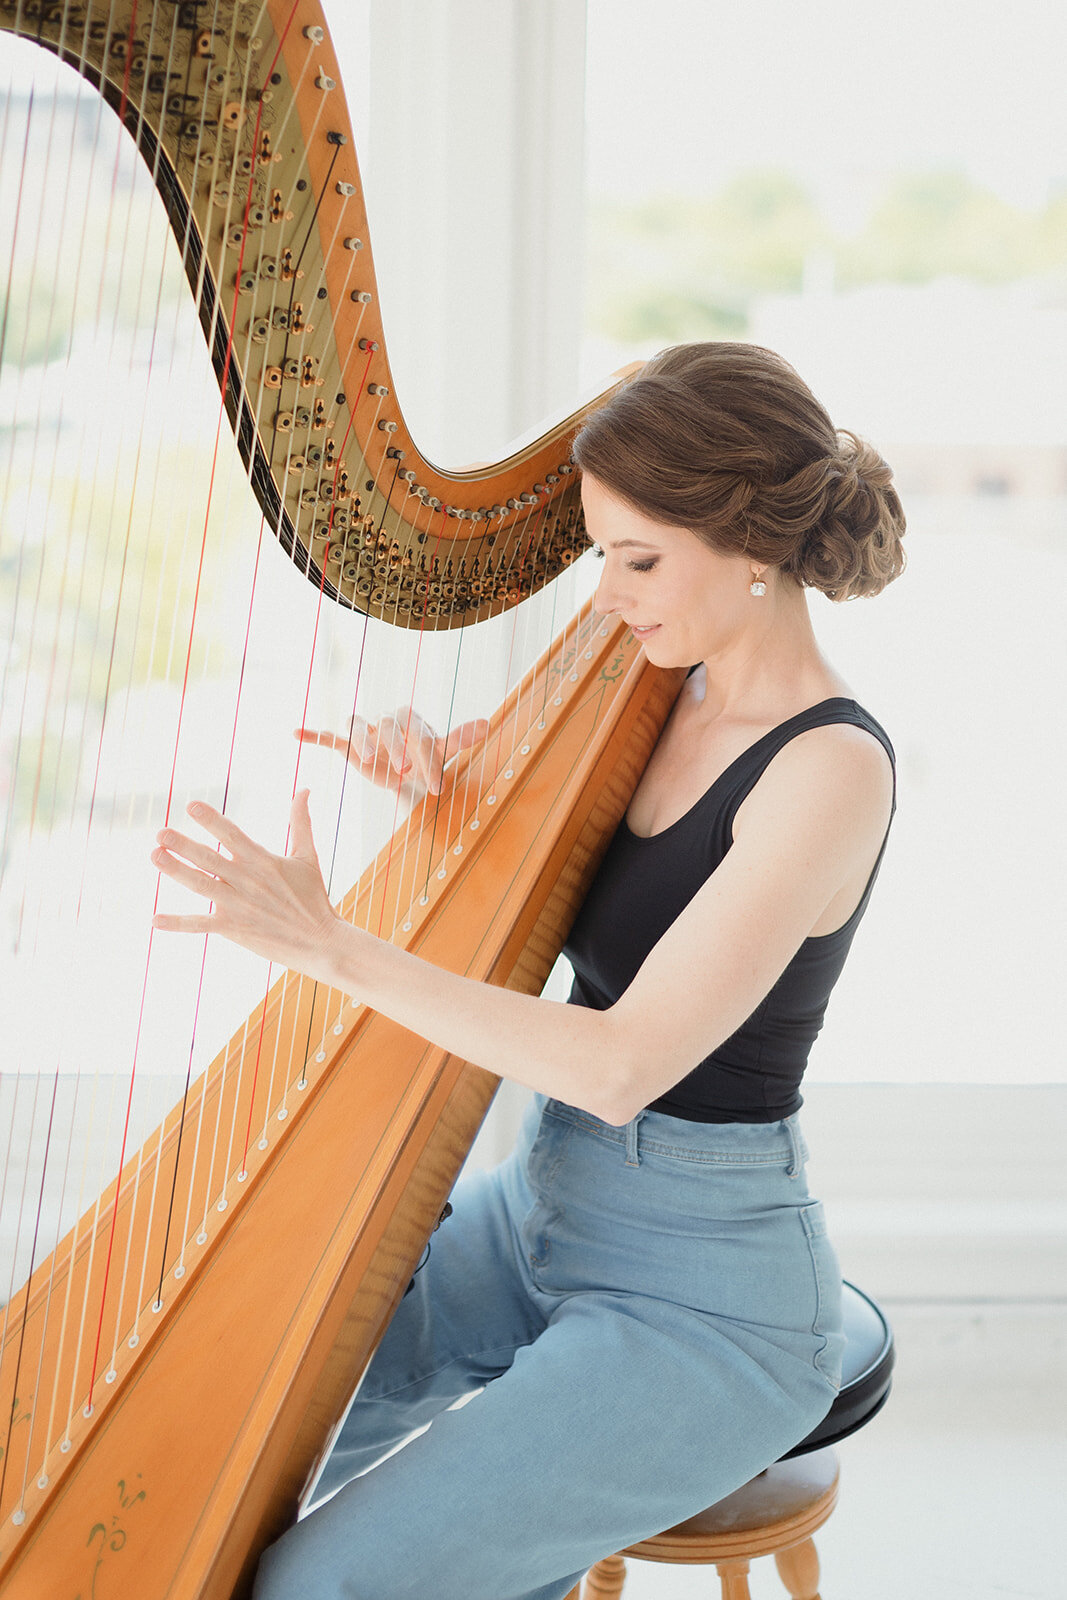 fair skinned woman with dark hair in black tank top and jeans, playing harp.